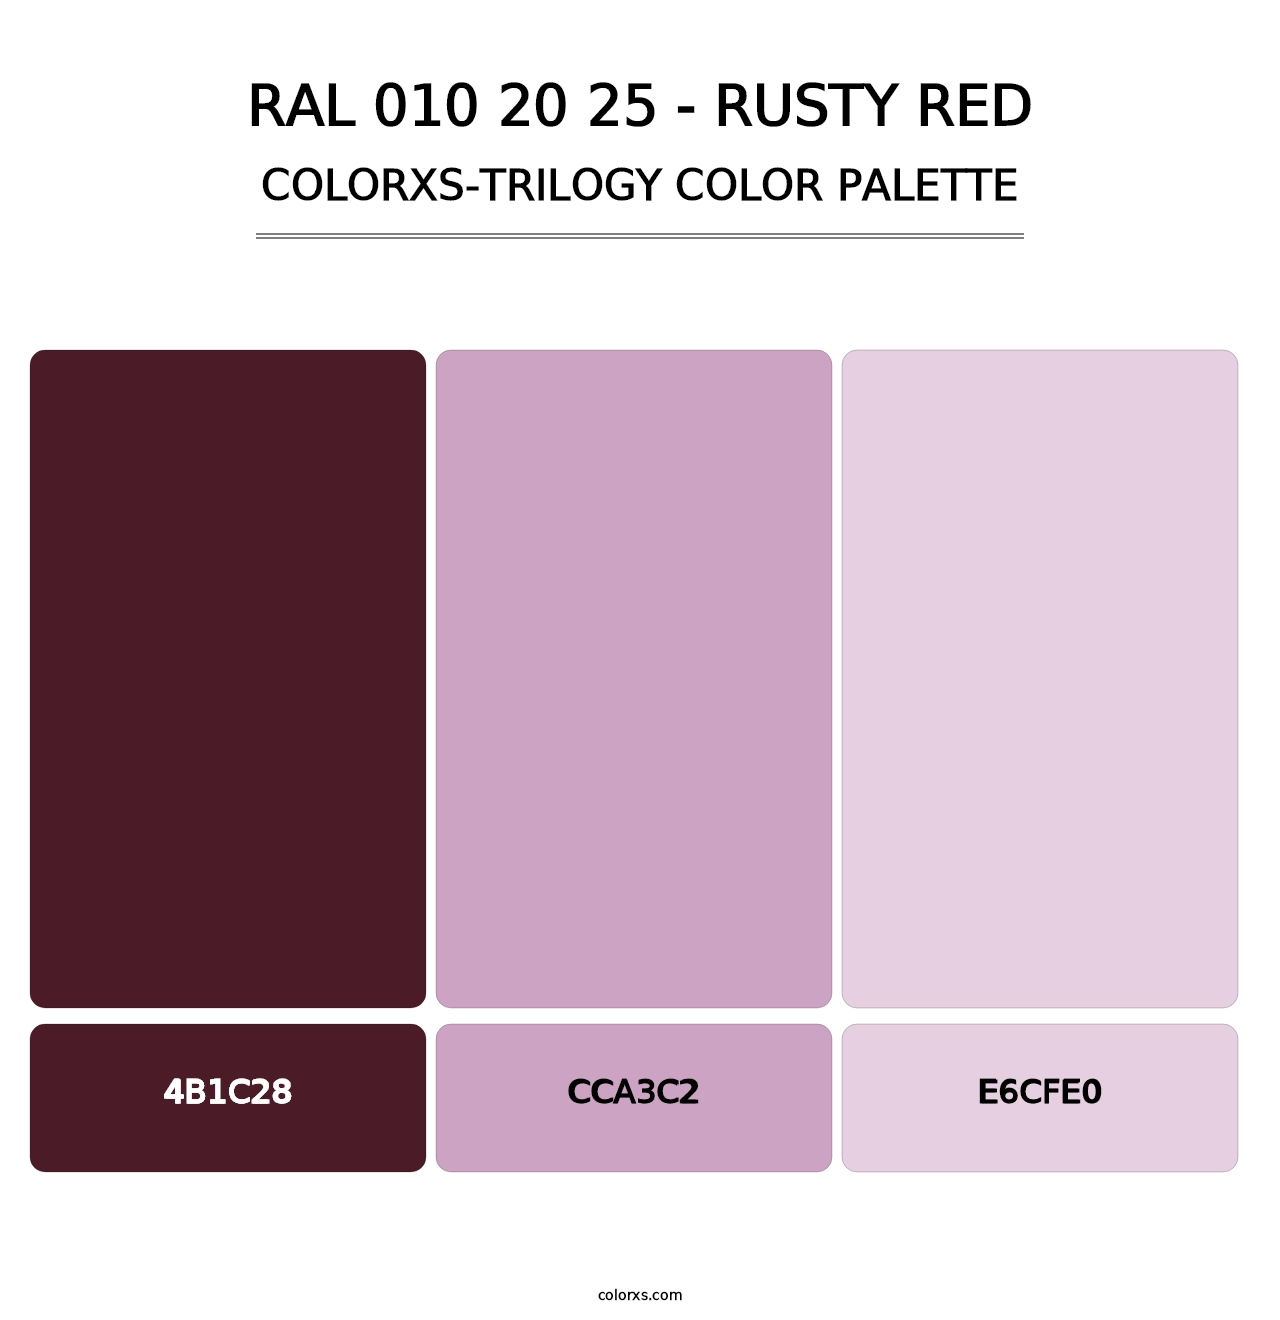 RAL 010 20 25 - Rusty Red - Colorxs Trilogy Palette